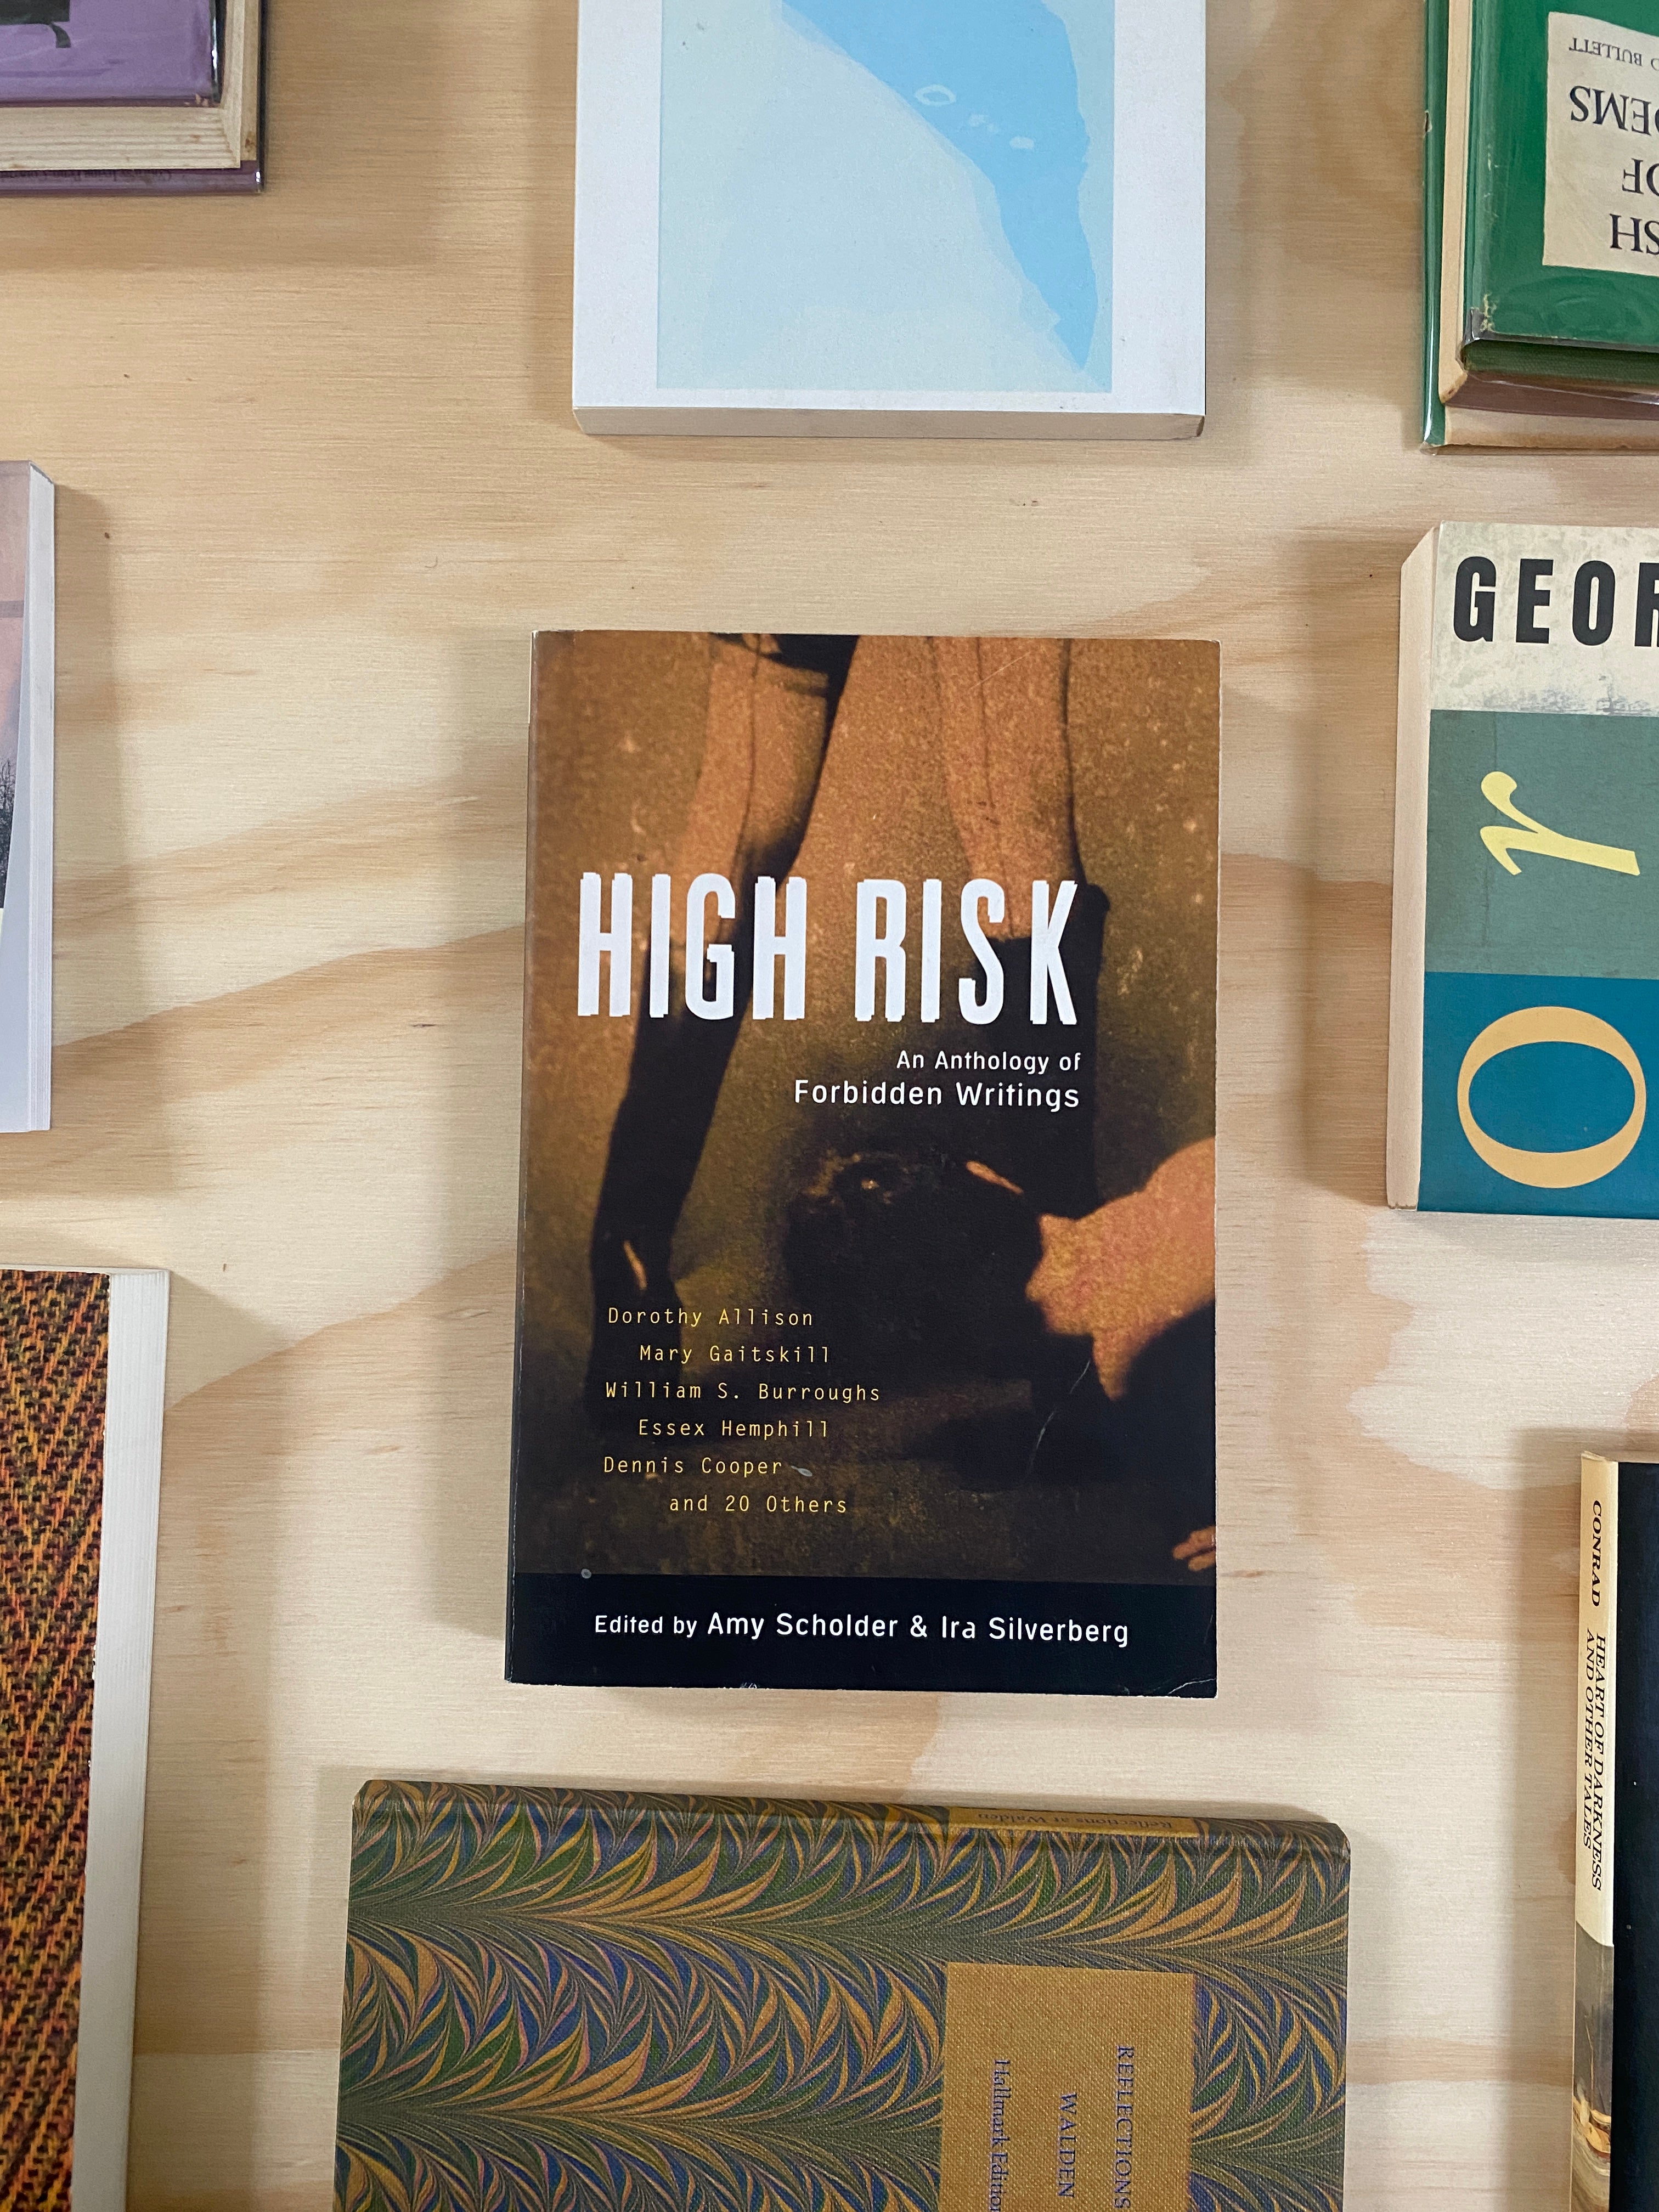 High Risk: An Anthology of Forbidden Writings edited by Amy Scholder (Plume Trade)